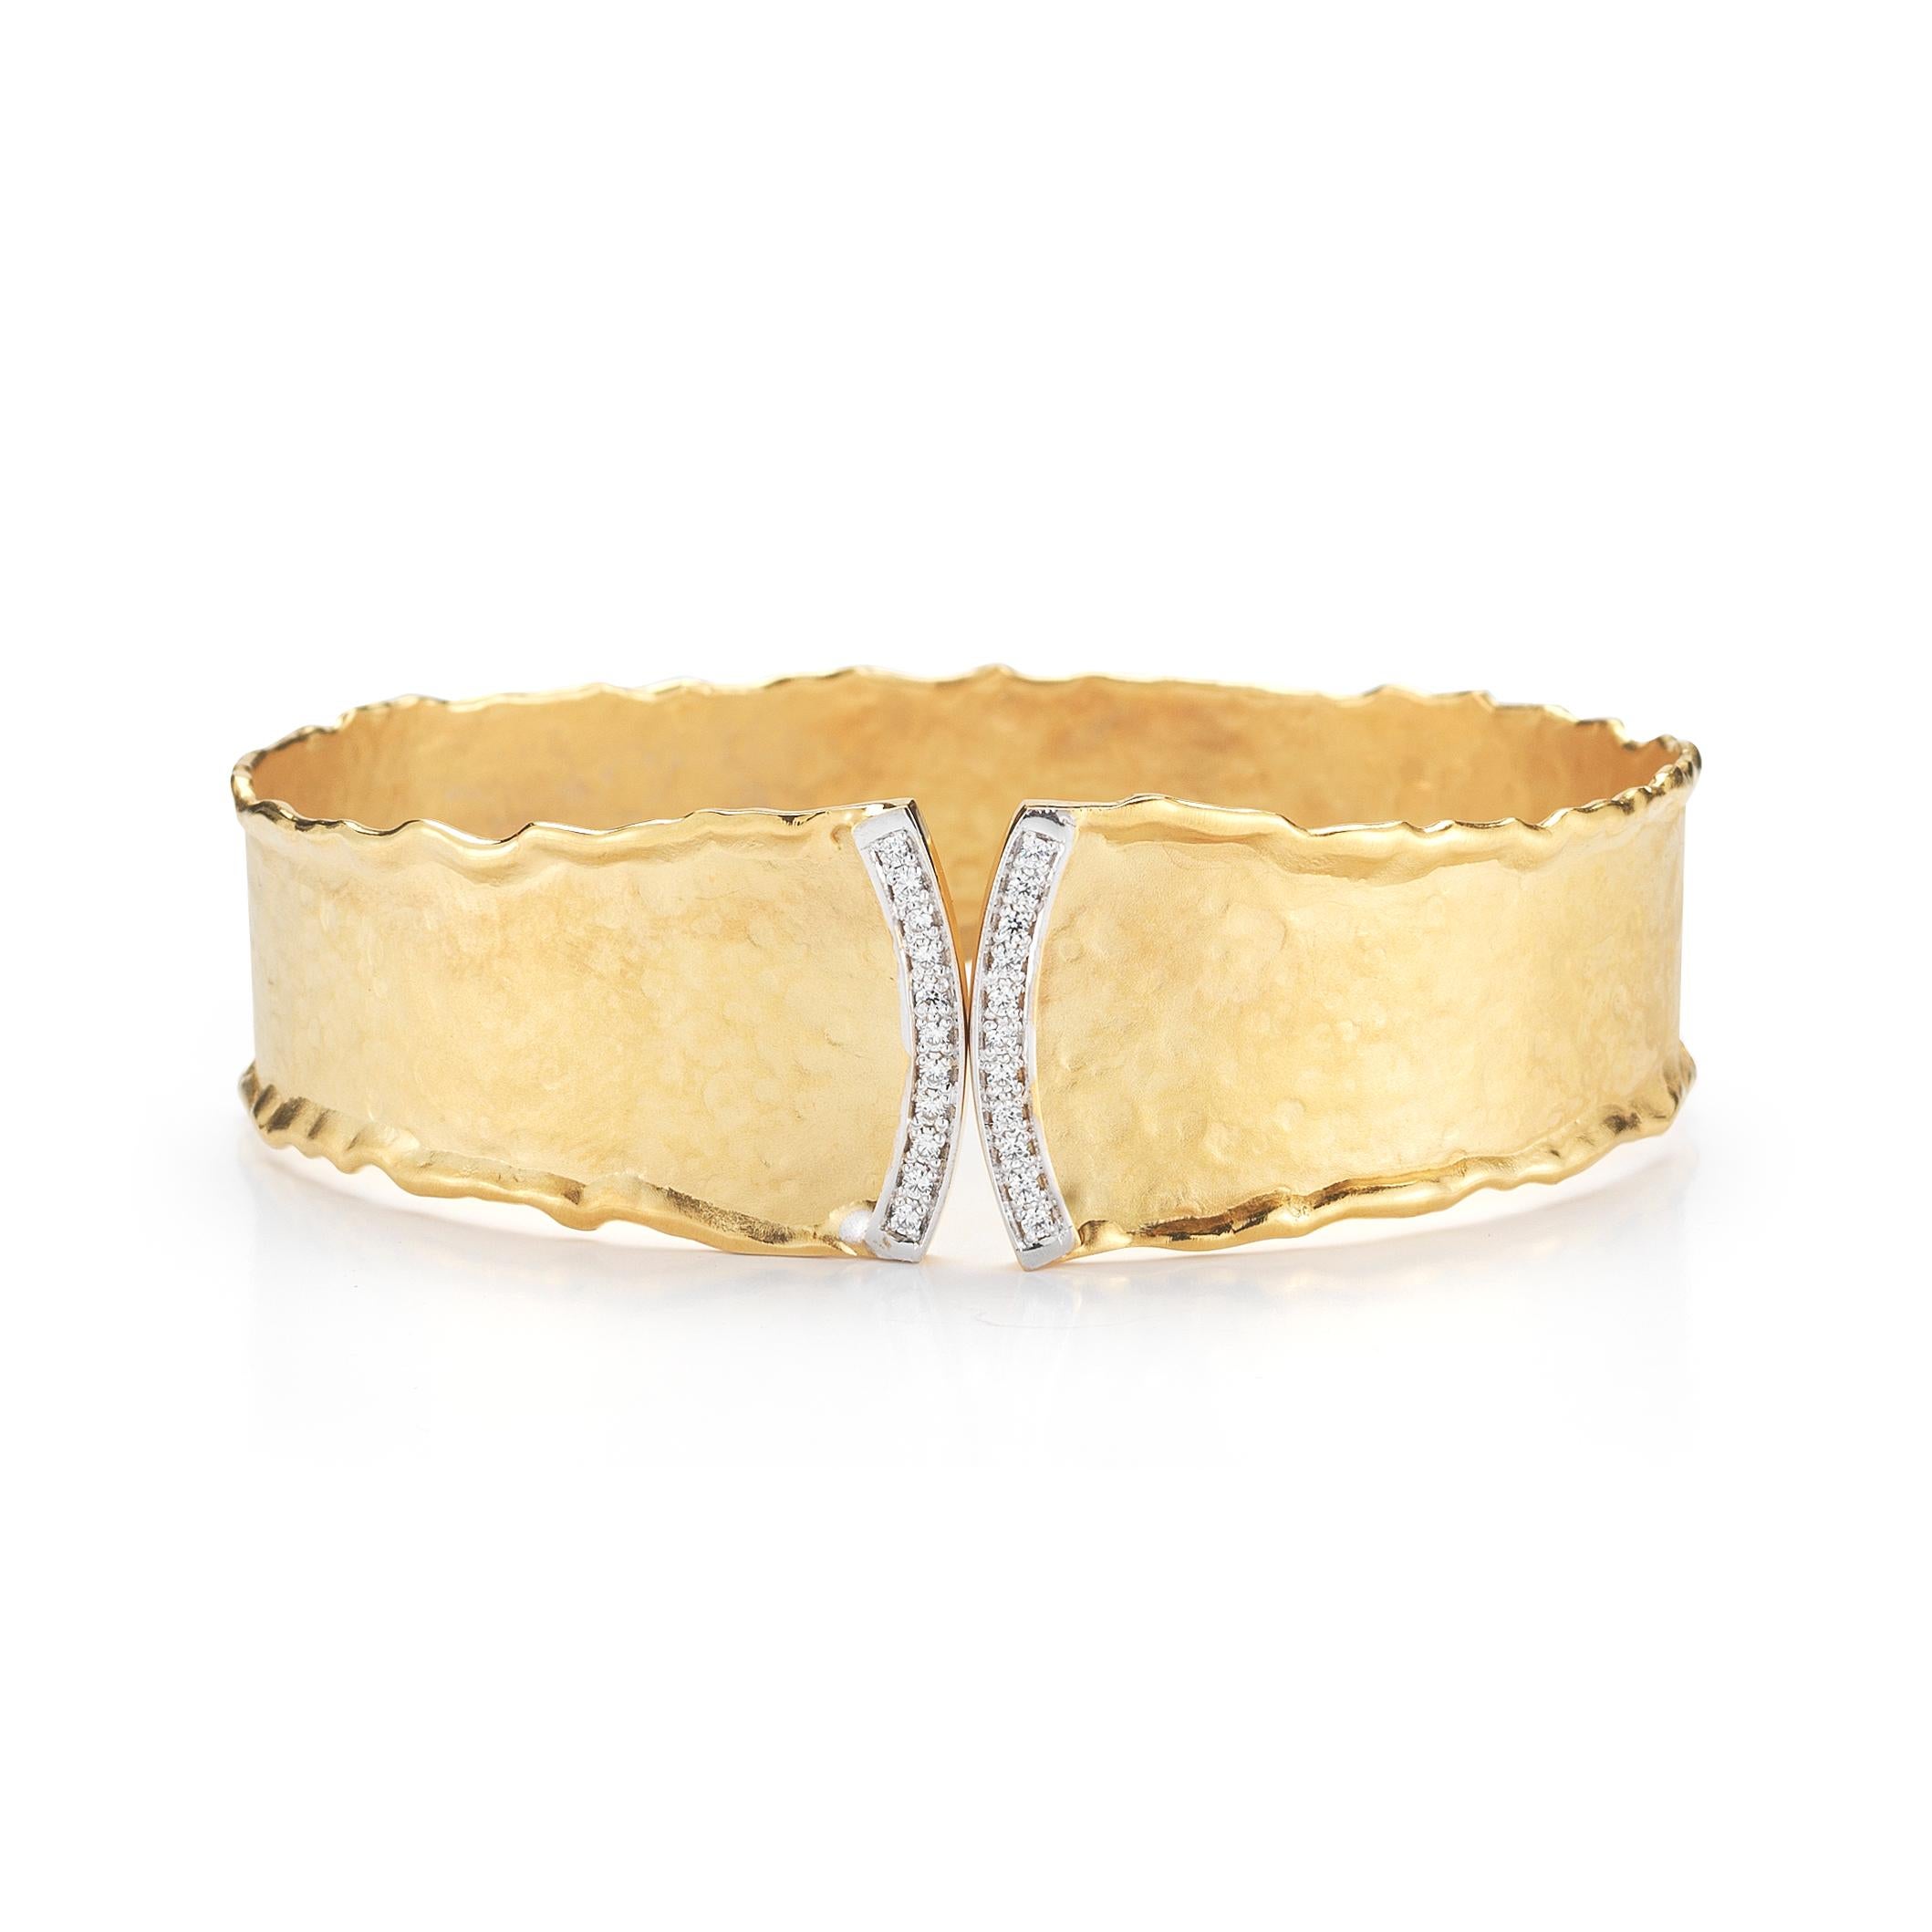 14 Karat Yellow Gold Hand-Crafted Matte And Hammer-Finished Scallop Edge Narrow Cuff Bracelet, Enhanced With 0.27 Carats Of Pave Set Diamonds.

